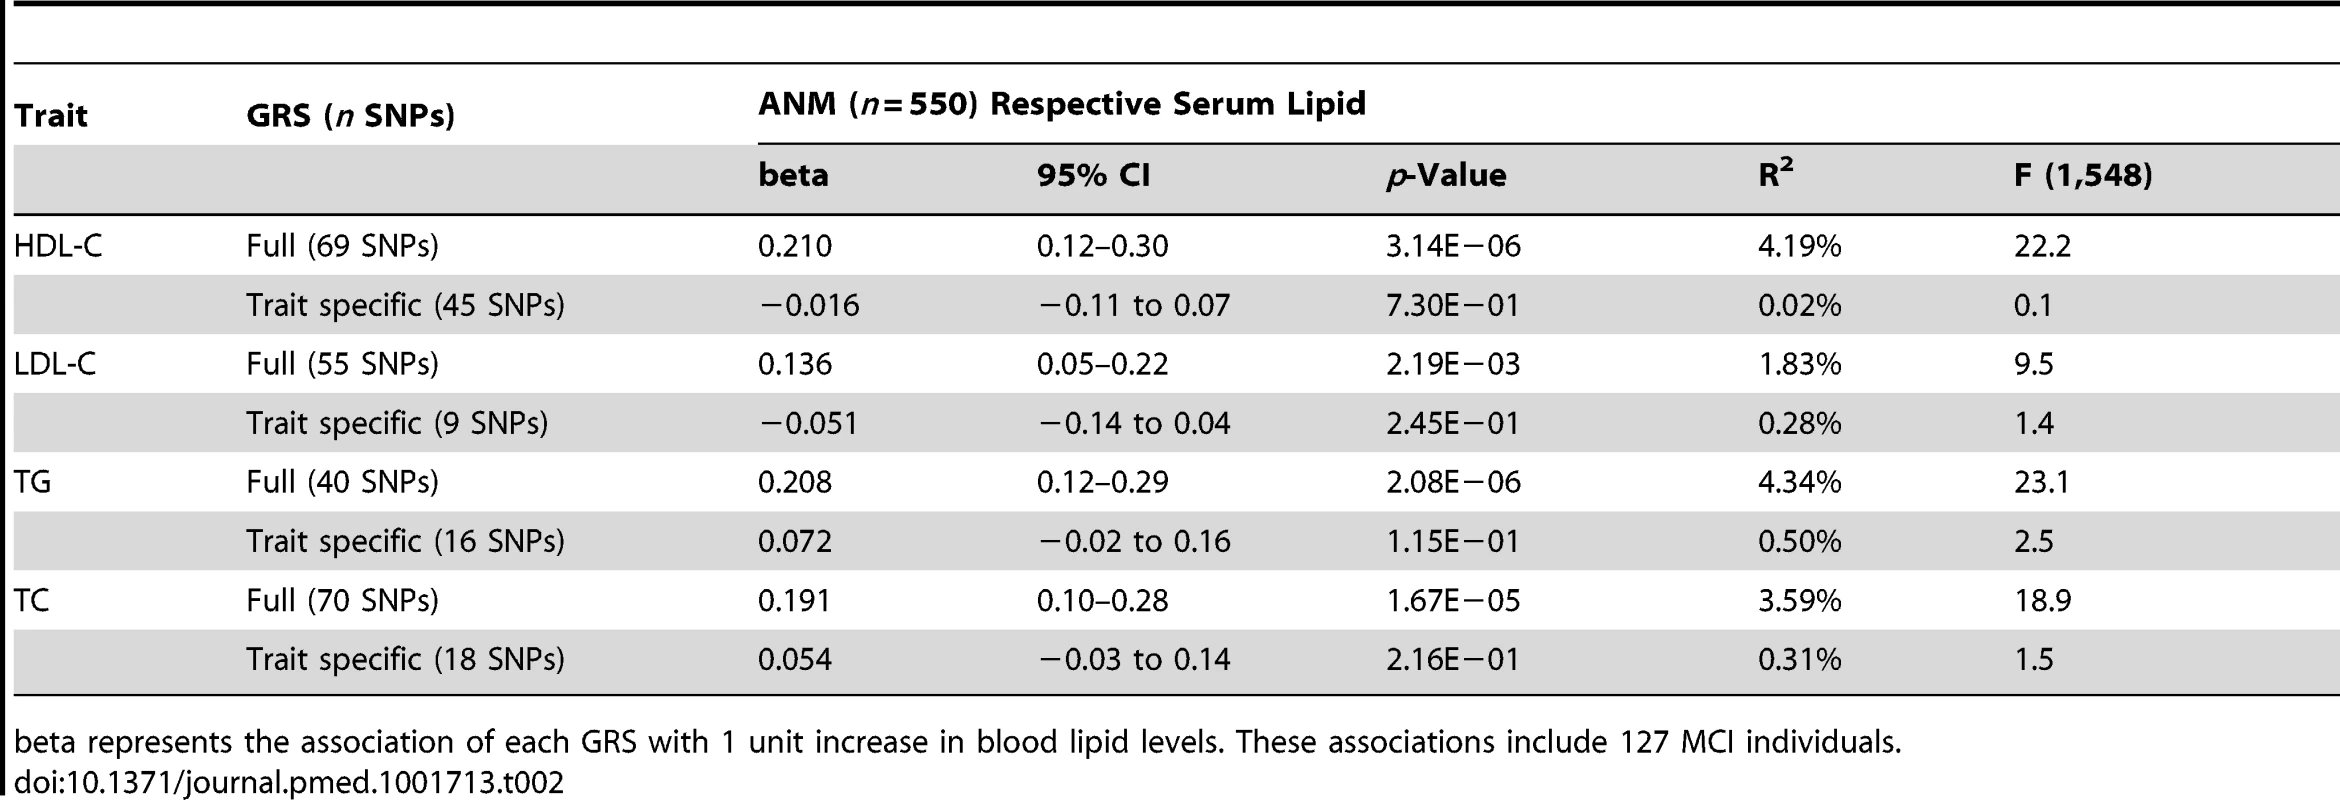 Association of the four full and trait specific GRSs with the respective serum levels in participants of the ANM cohort.